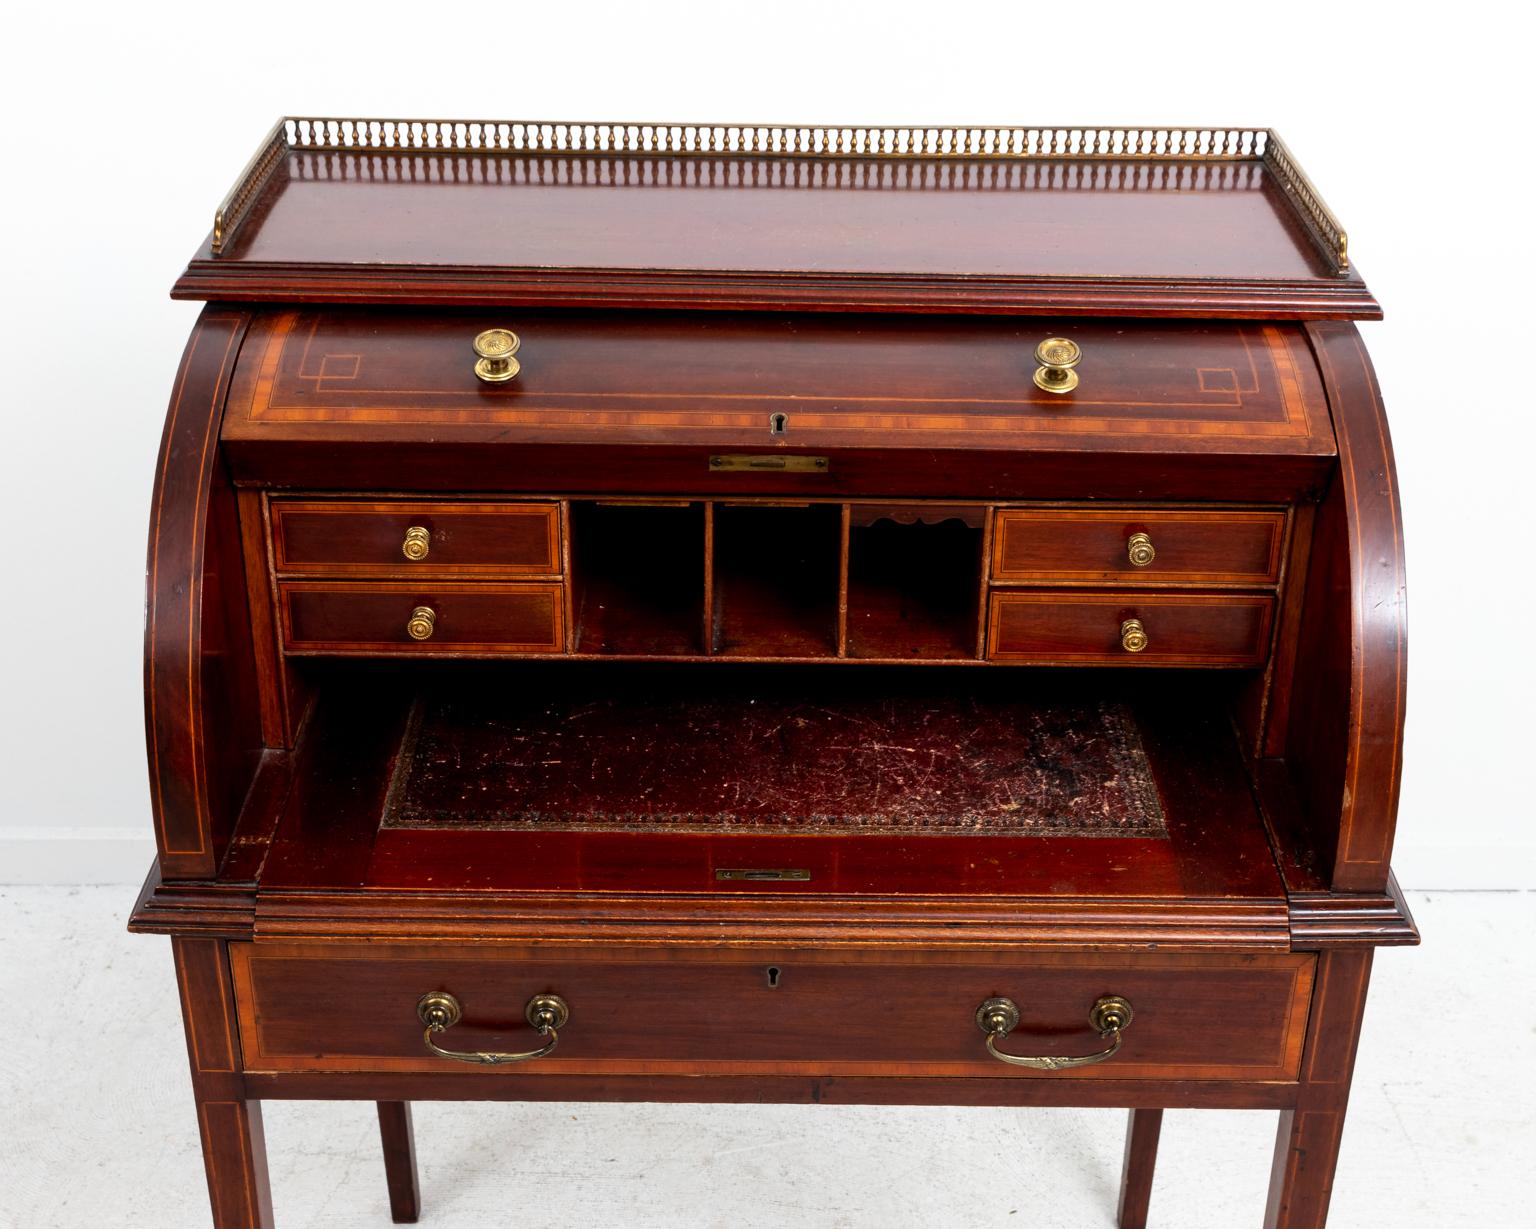 George III style roll top mahogany desk with various compartments and metal hardware, circa 1920s. Please note of wear consistent with age.